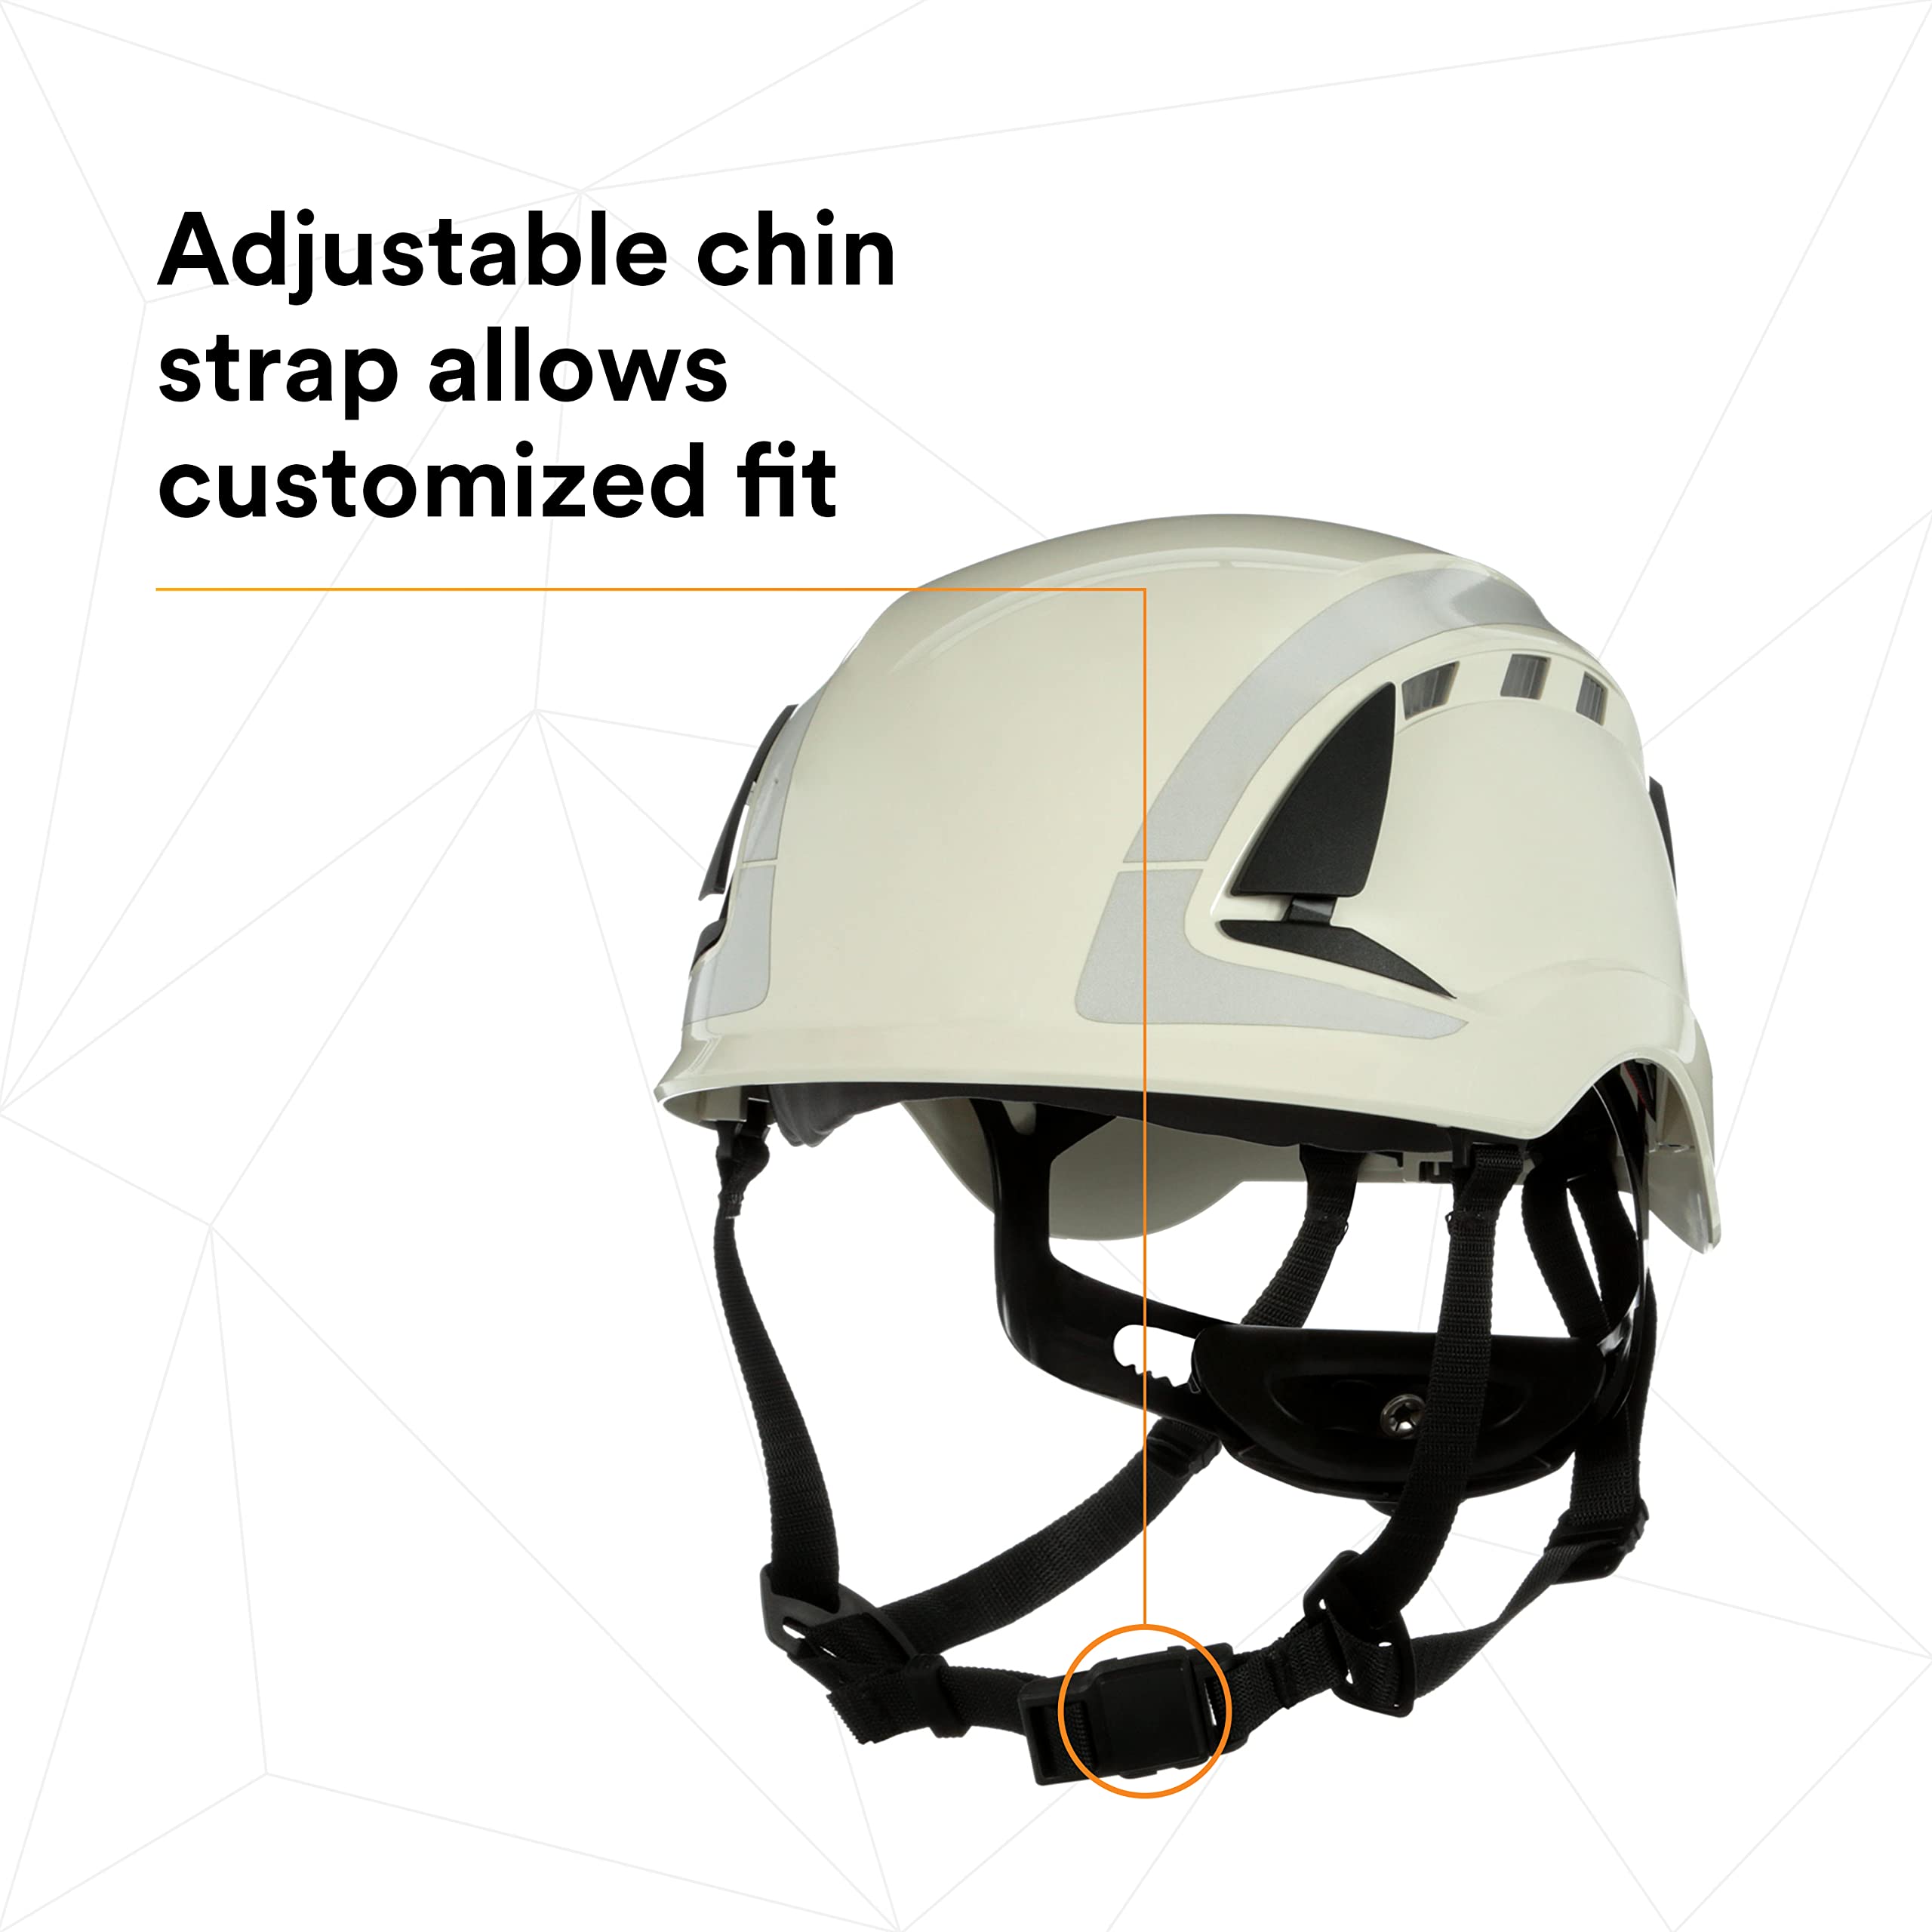 3M SecureFit Safety Helmet - Climbing Style Inspired Safety Helmet with 6 Point Suspension System